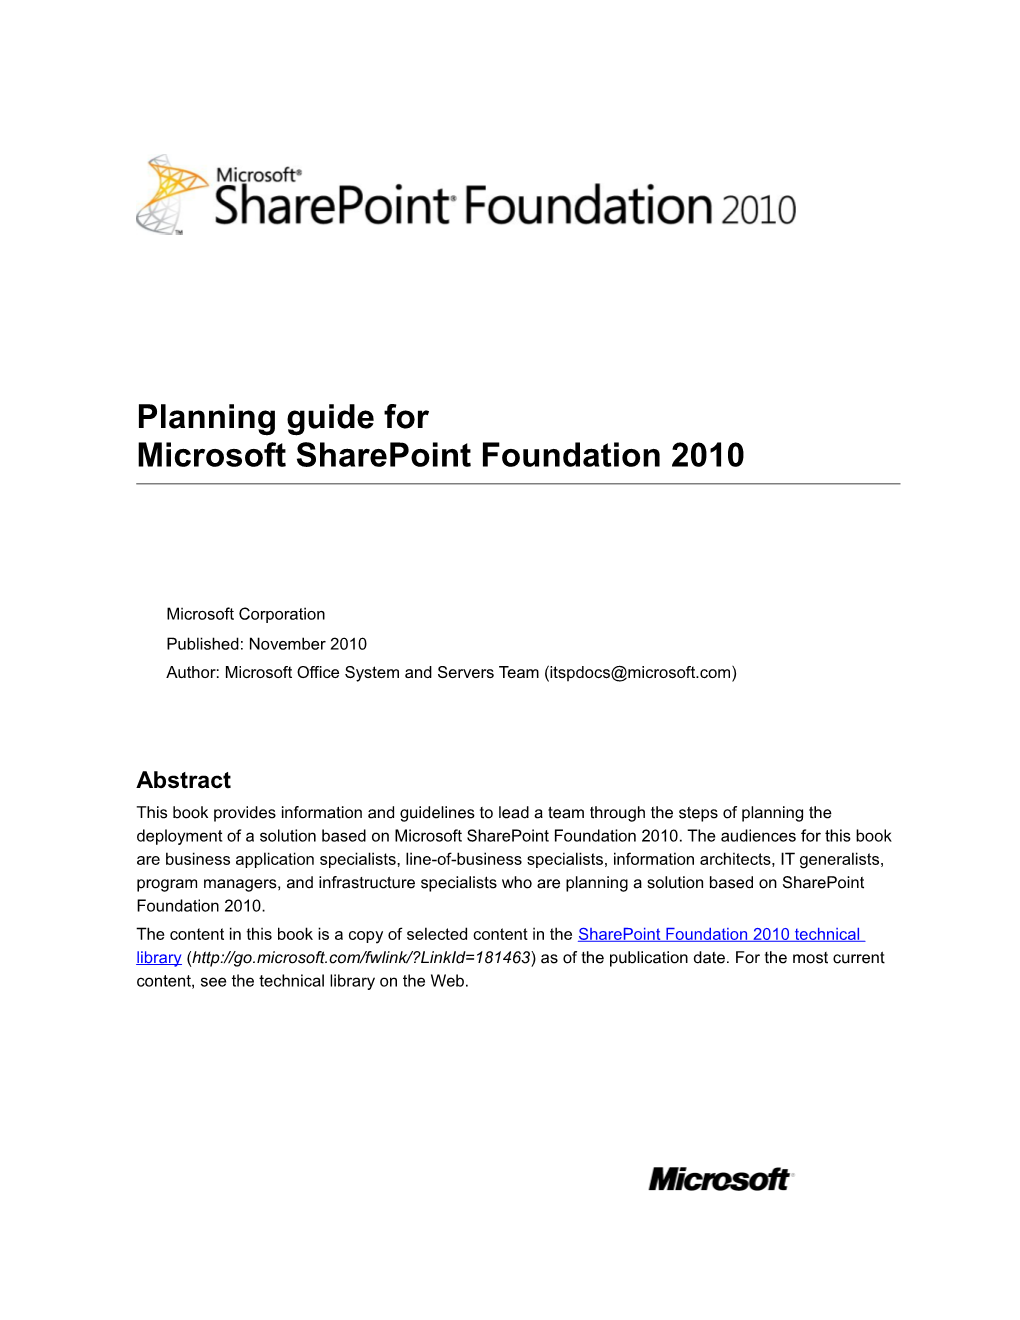 Planning Guide for Microsoft Sharepoint Foundation 2010